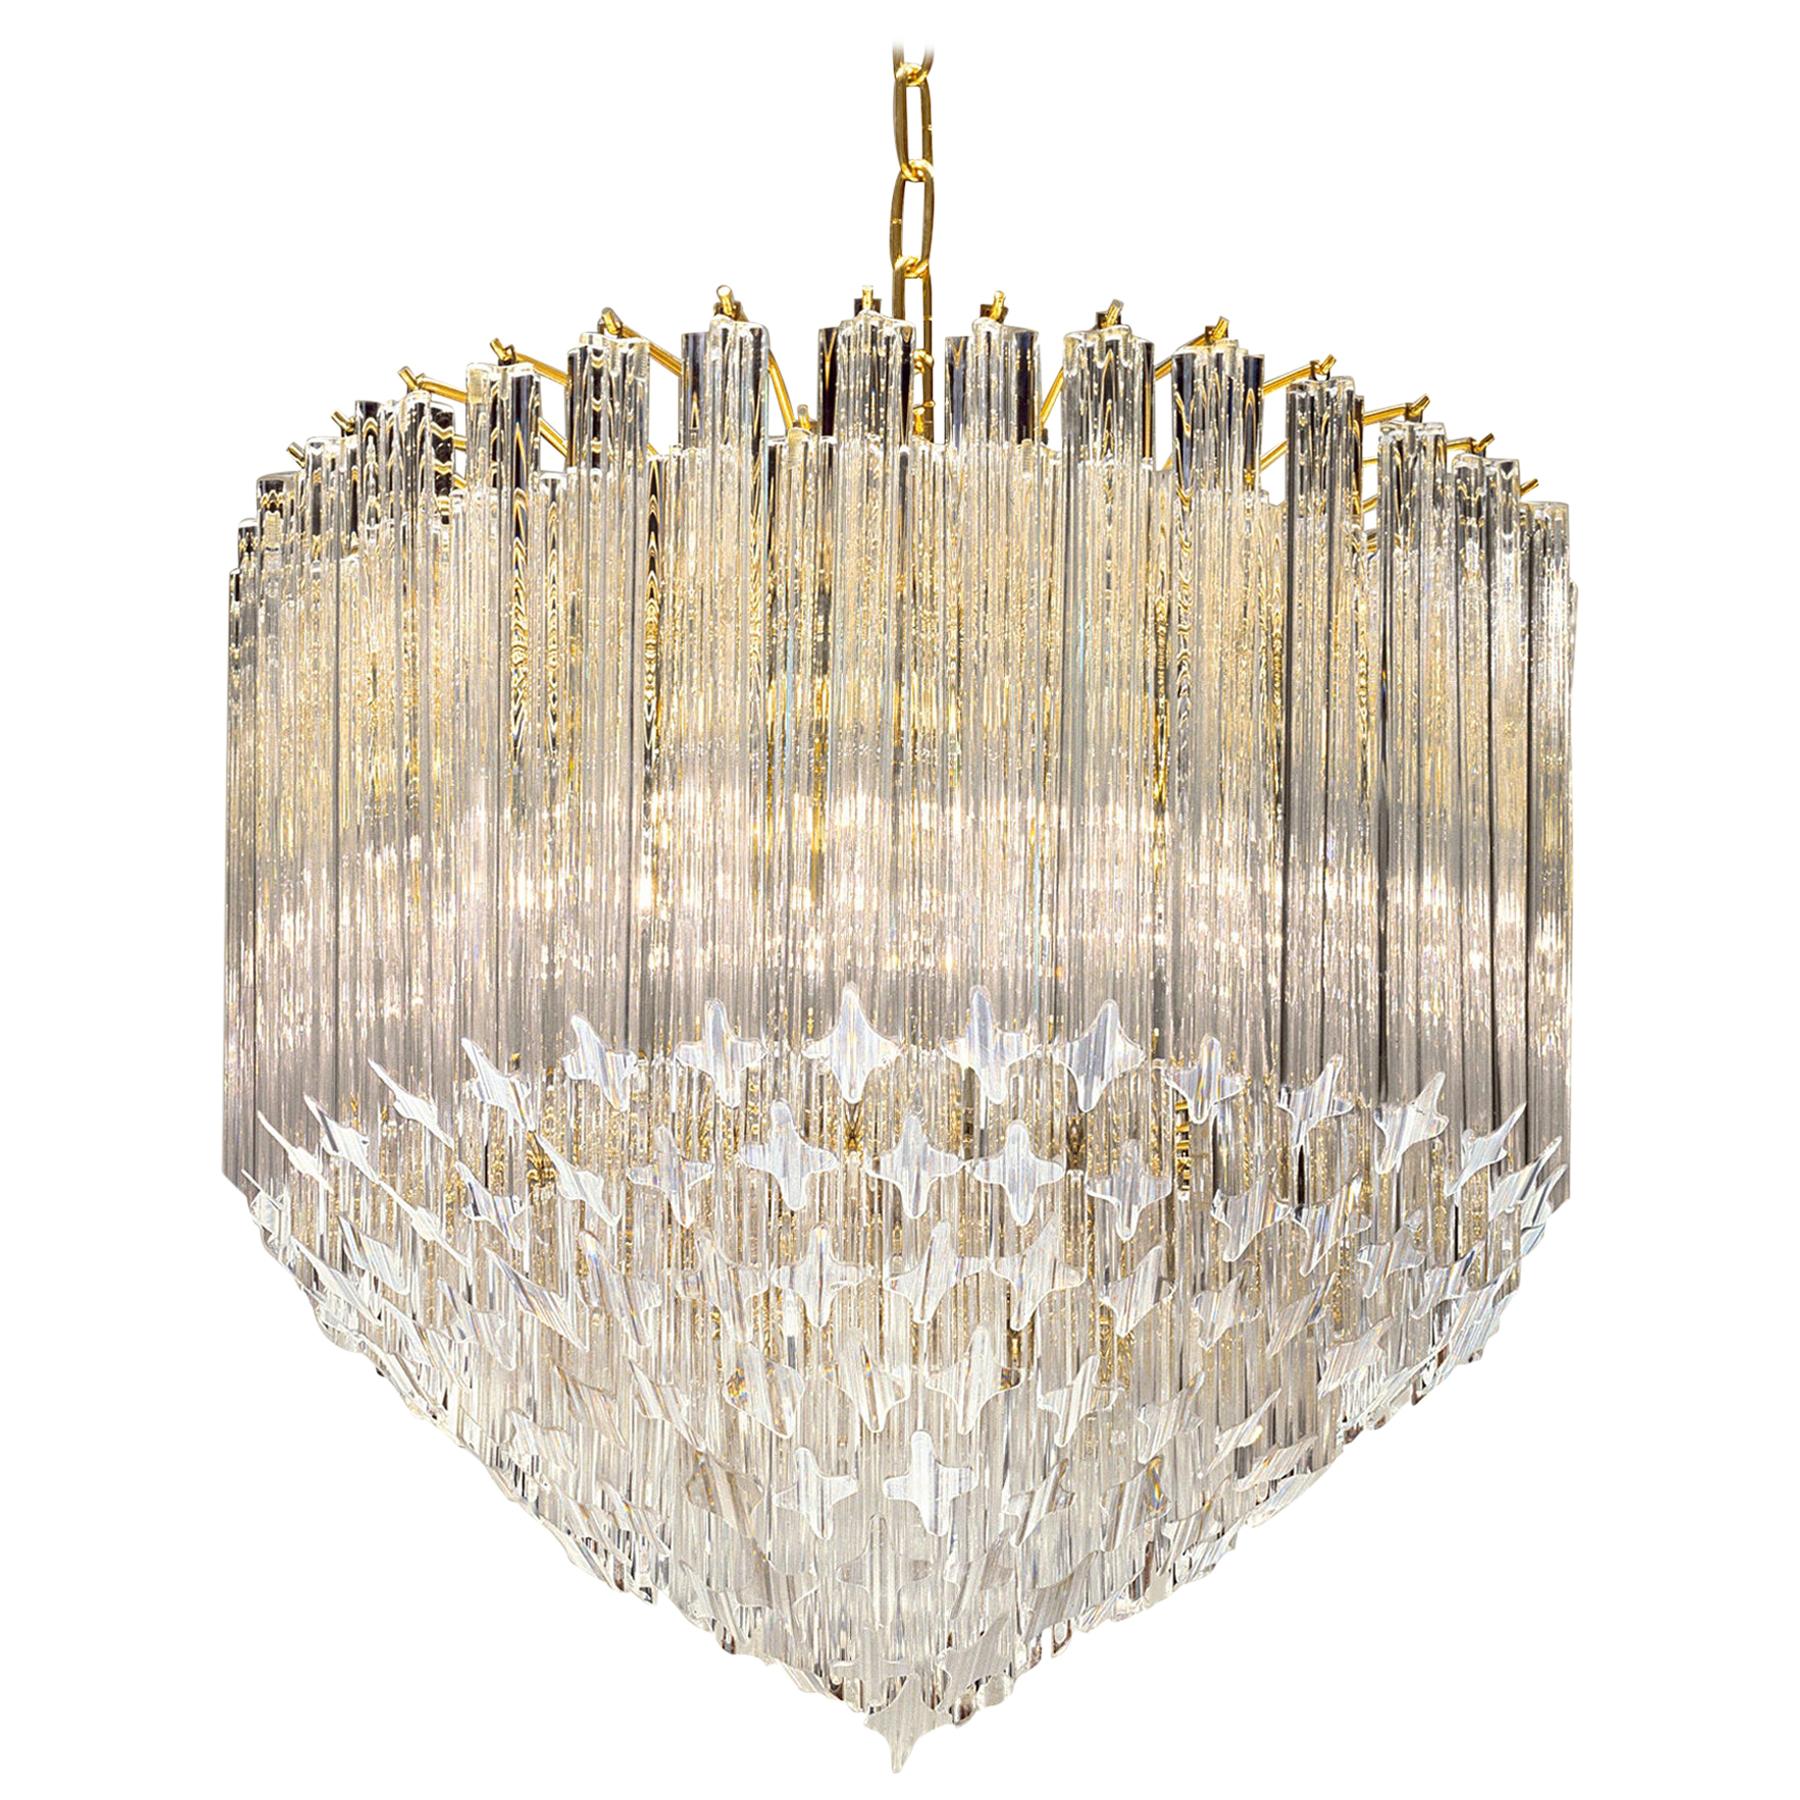 Contemporary Italian Crystal 'Cake' Chandelier with Gold Frame